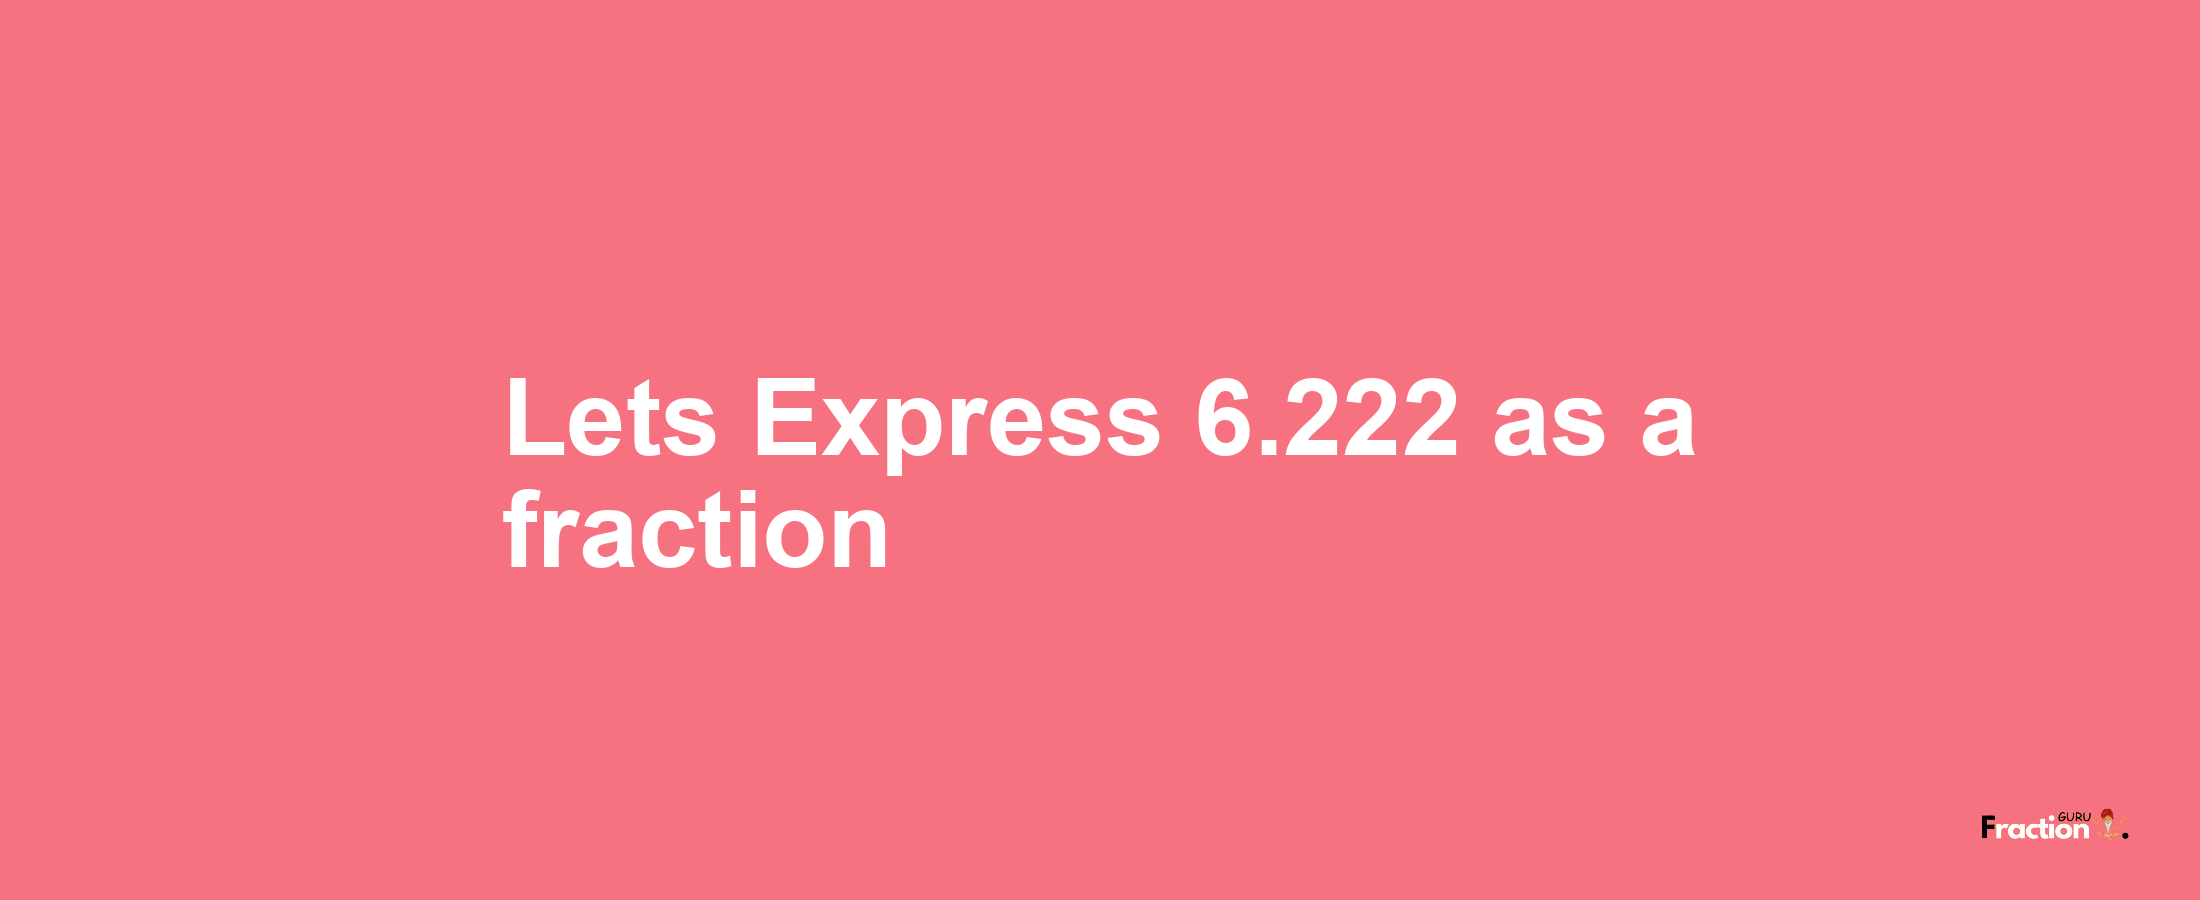 Lets Express 6.222 as afraction